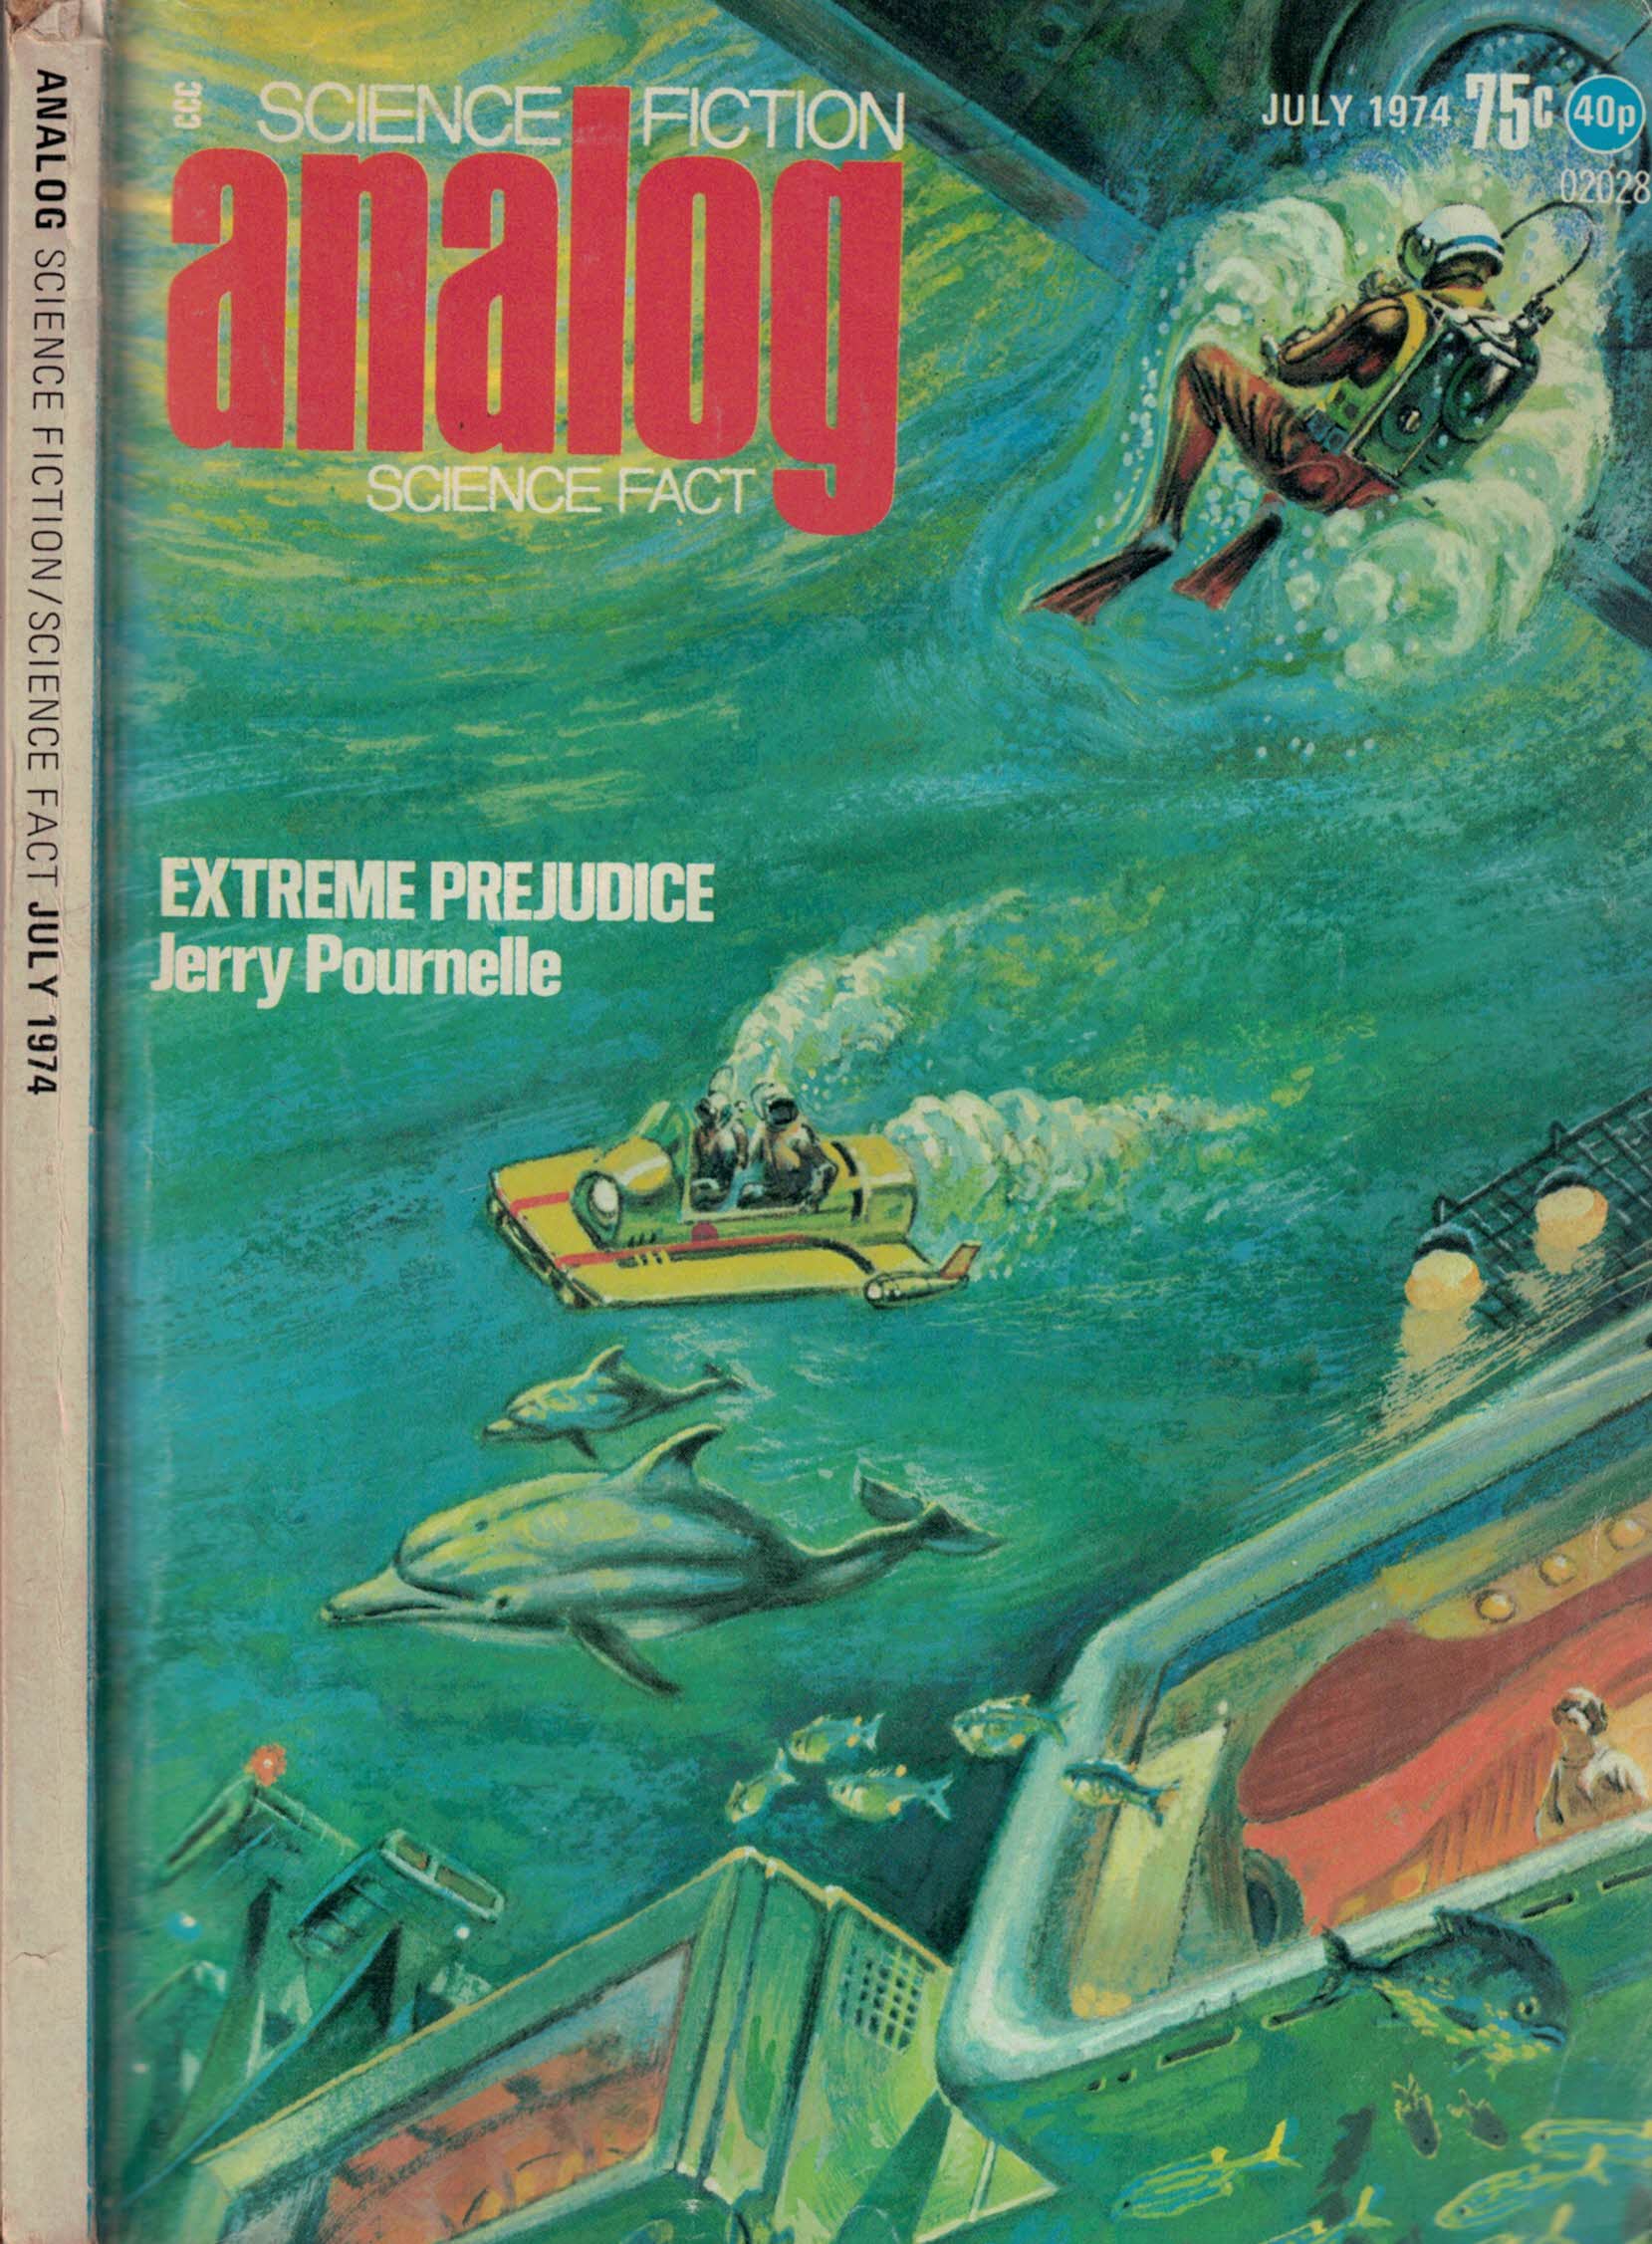 Analog. Science Fiction and Fact. Volume 93, Number 5. July 1974.